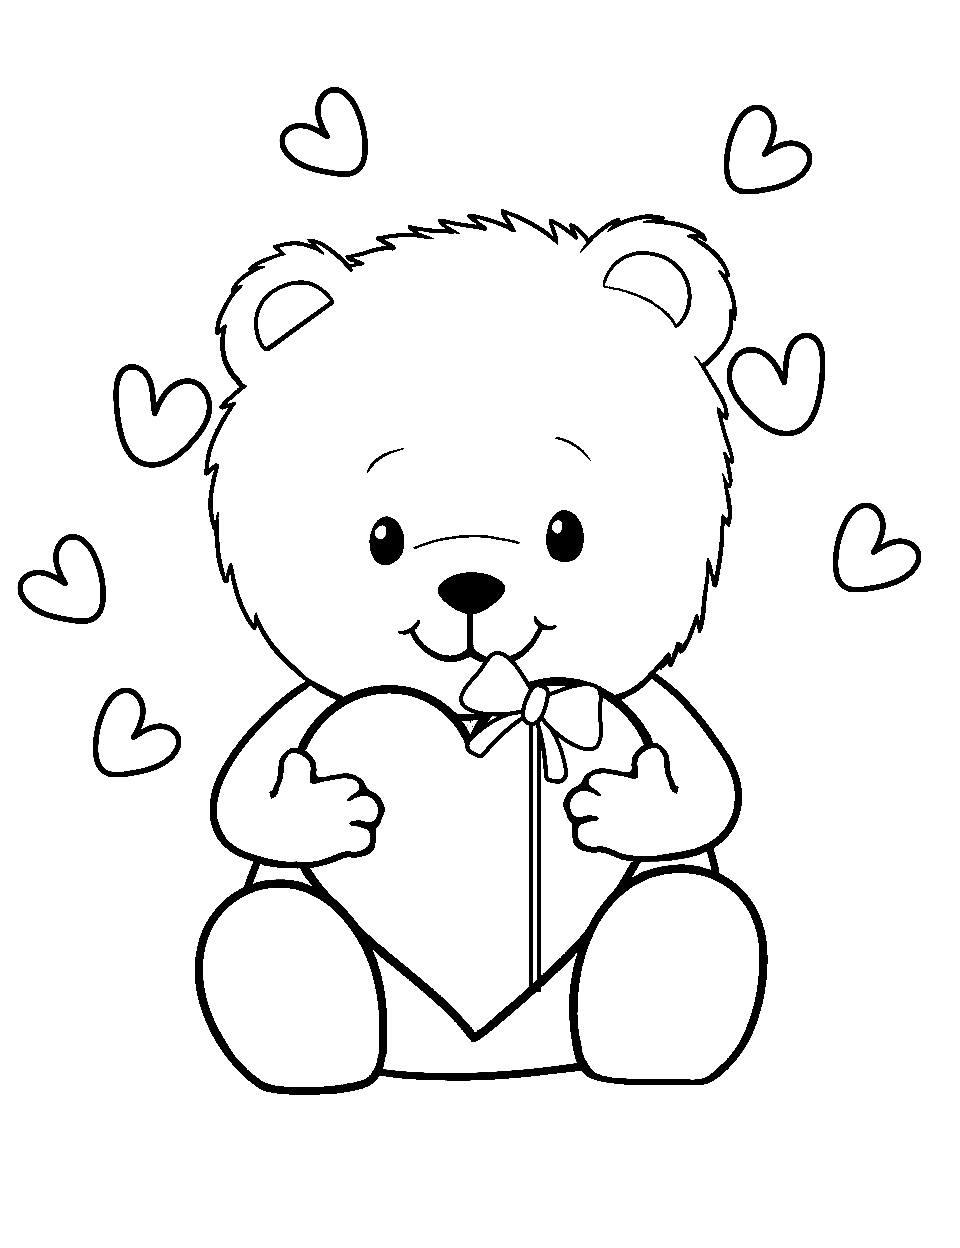 Bear's Valentine Surprise Coloring Page - A bear holding a heart-shaped gift for Valentine’s Day, with love in the air.